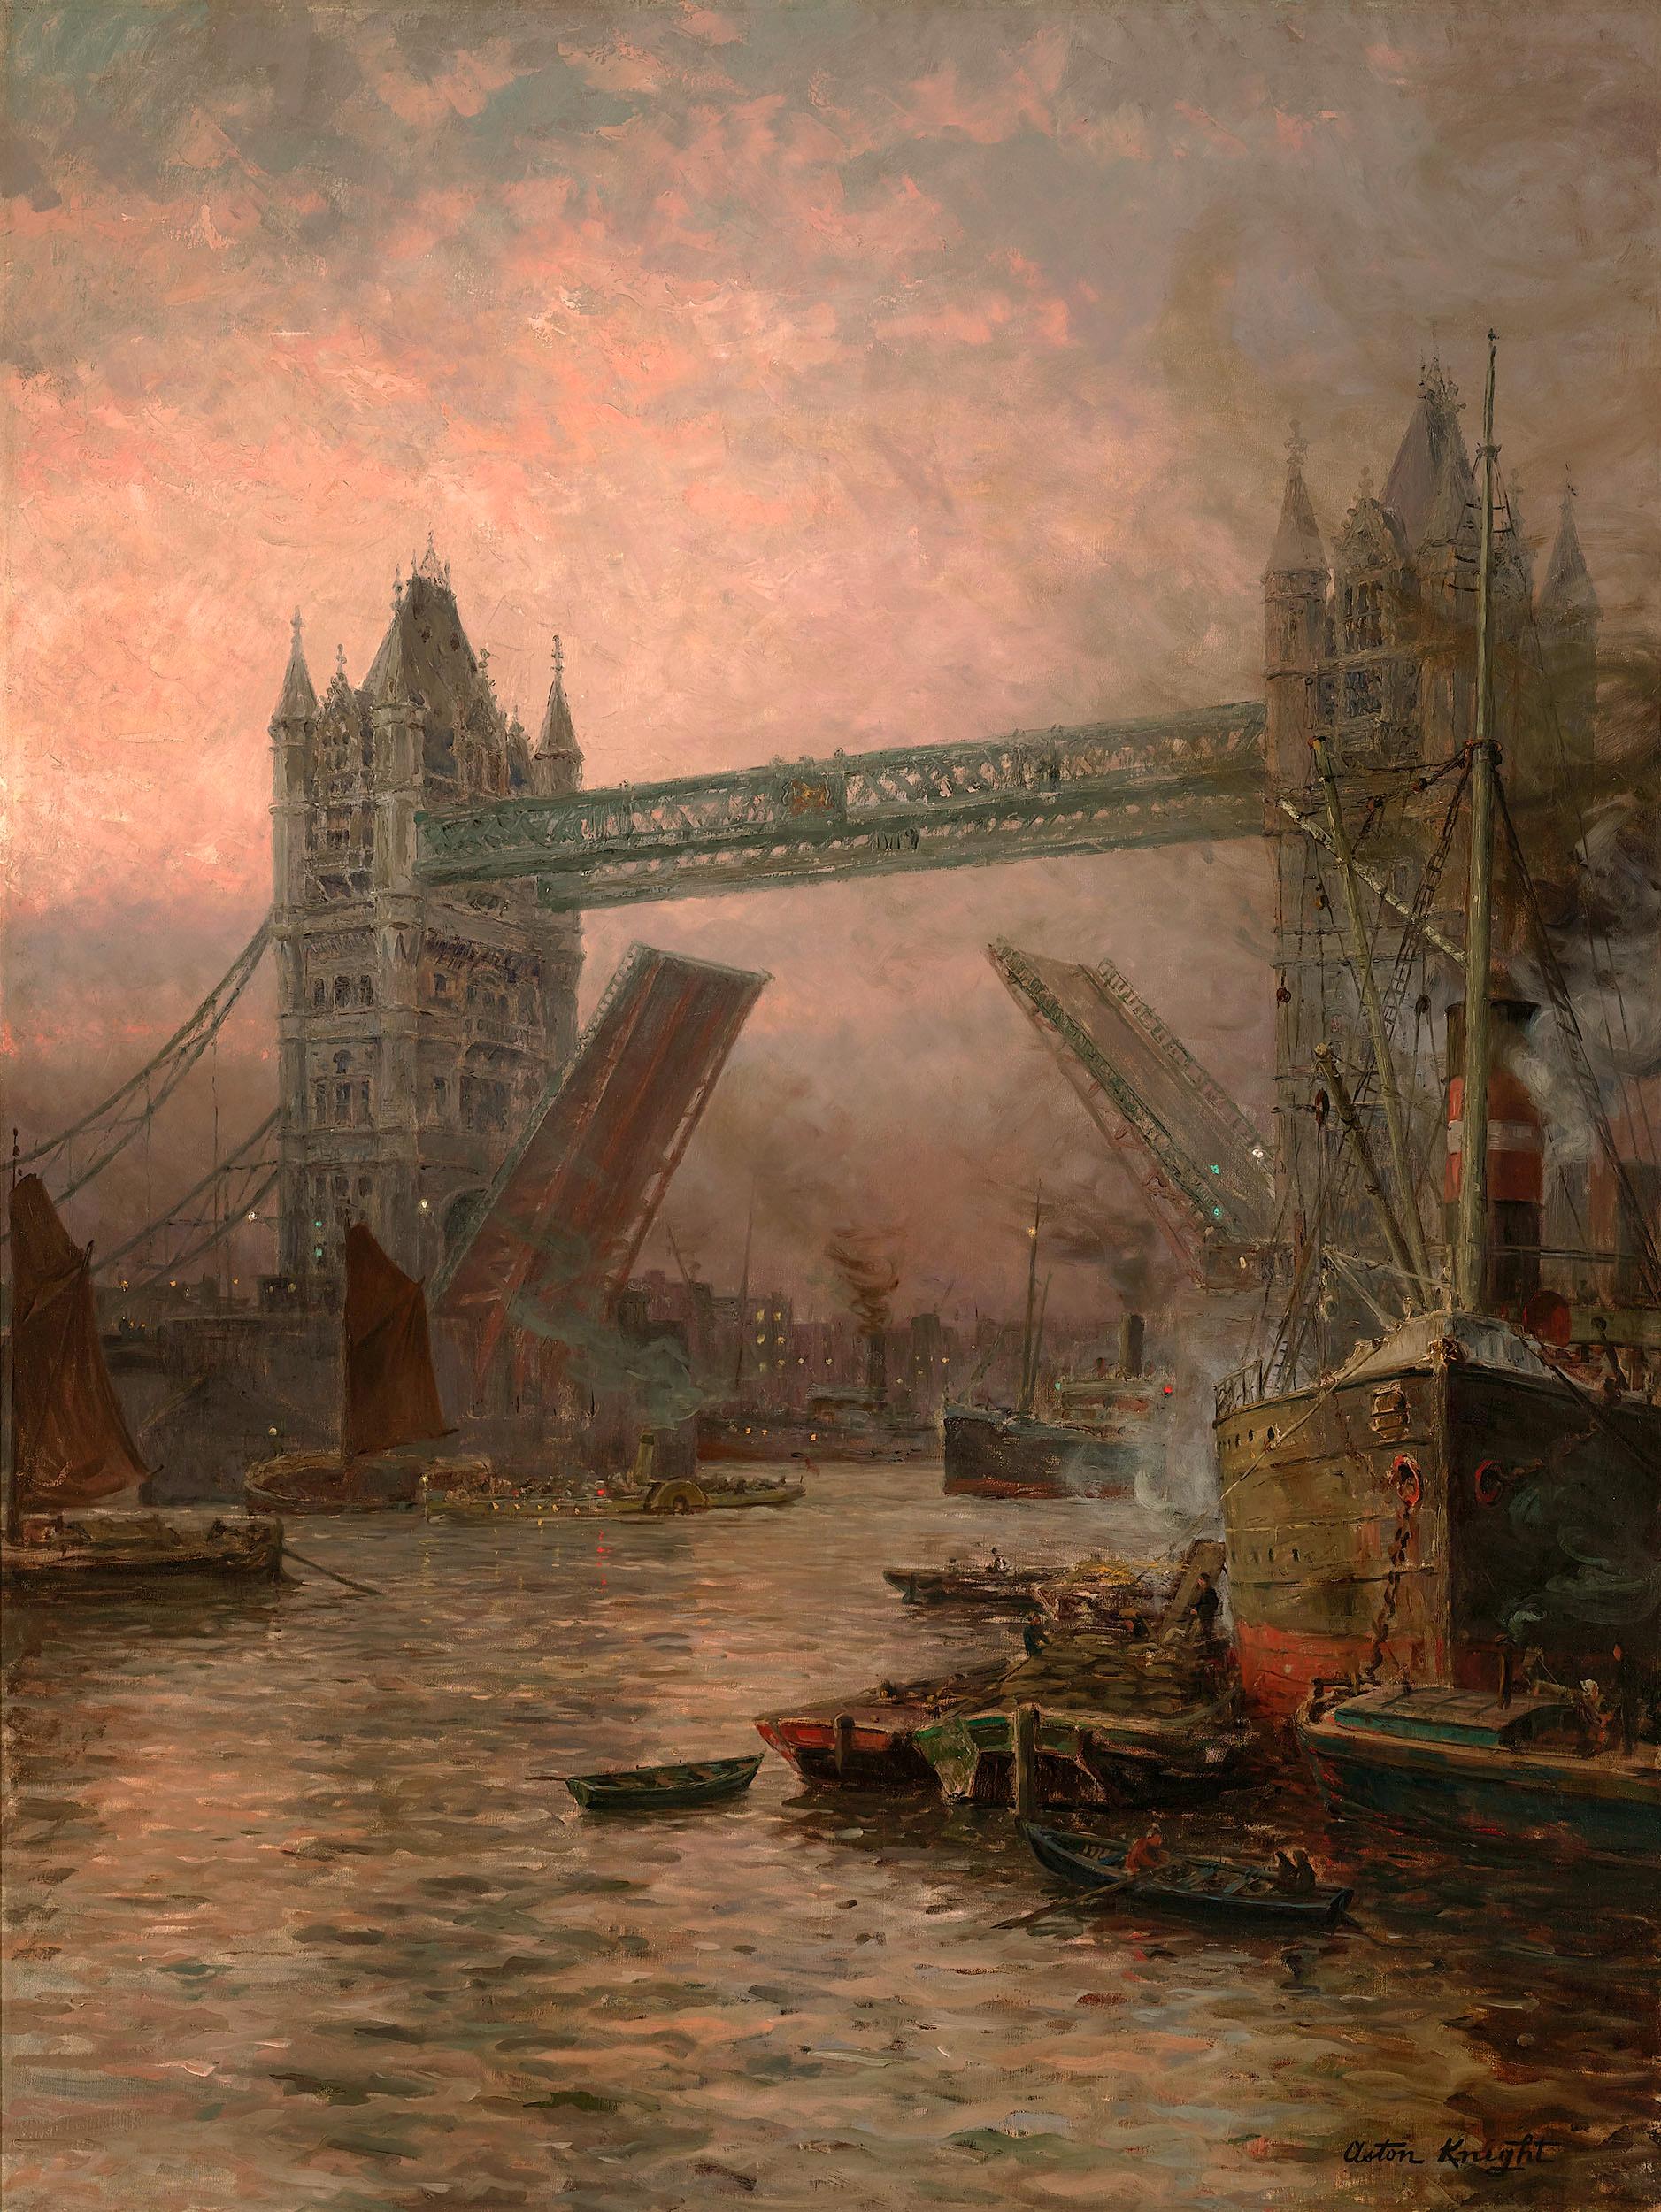 Louis Aston Knight 1873-1948  American

The Giant Cities–London

Signed "Aston Knight" (lower right)
Oil on canvas

This monumental landscape painting of London's famed Tower Bridge was created by Parisian-born American artist, Louis Aston Knight.